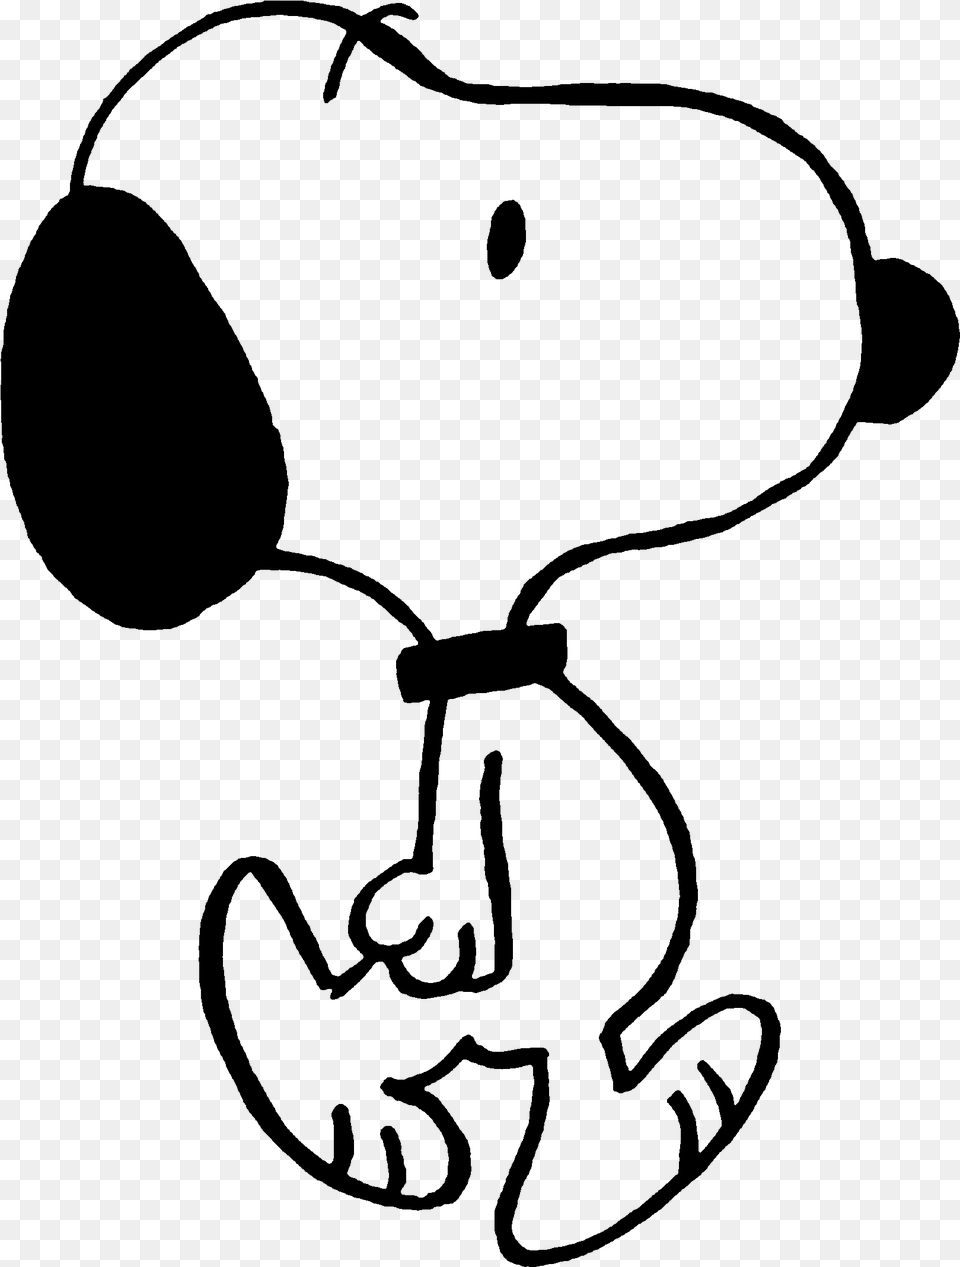 Hd Wallpapers Snoopy Black And White Itt Snoopy Black And White, Gray Png